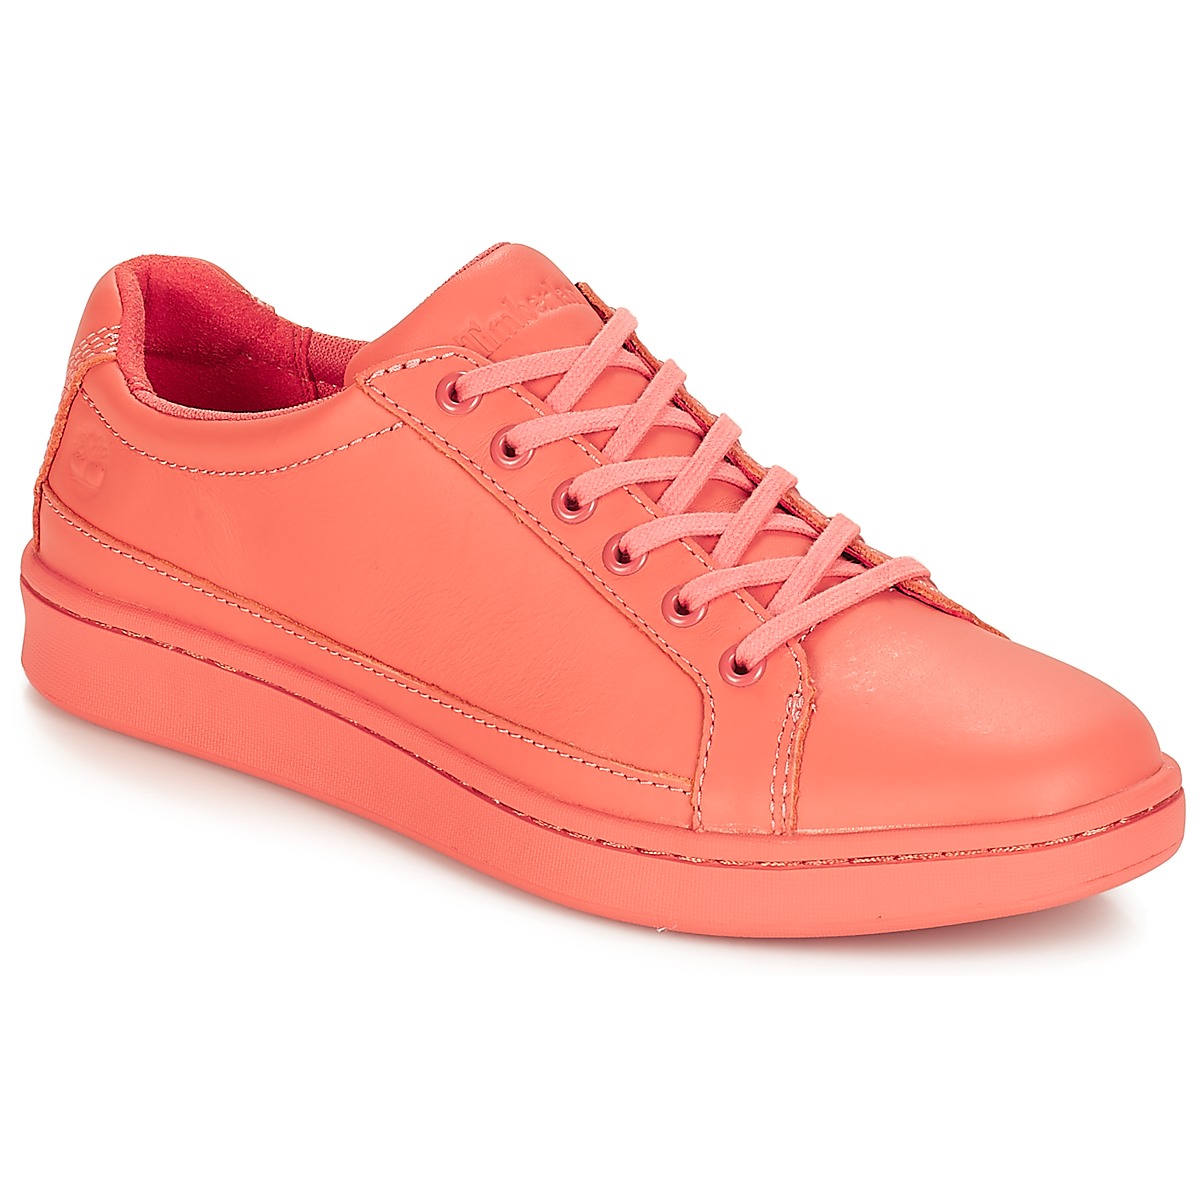 Scarpe Donna Sneakers basse Timberland San Francisco Flavor Oxford 